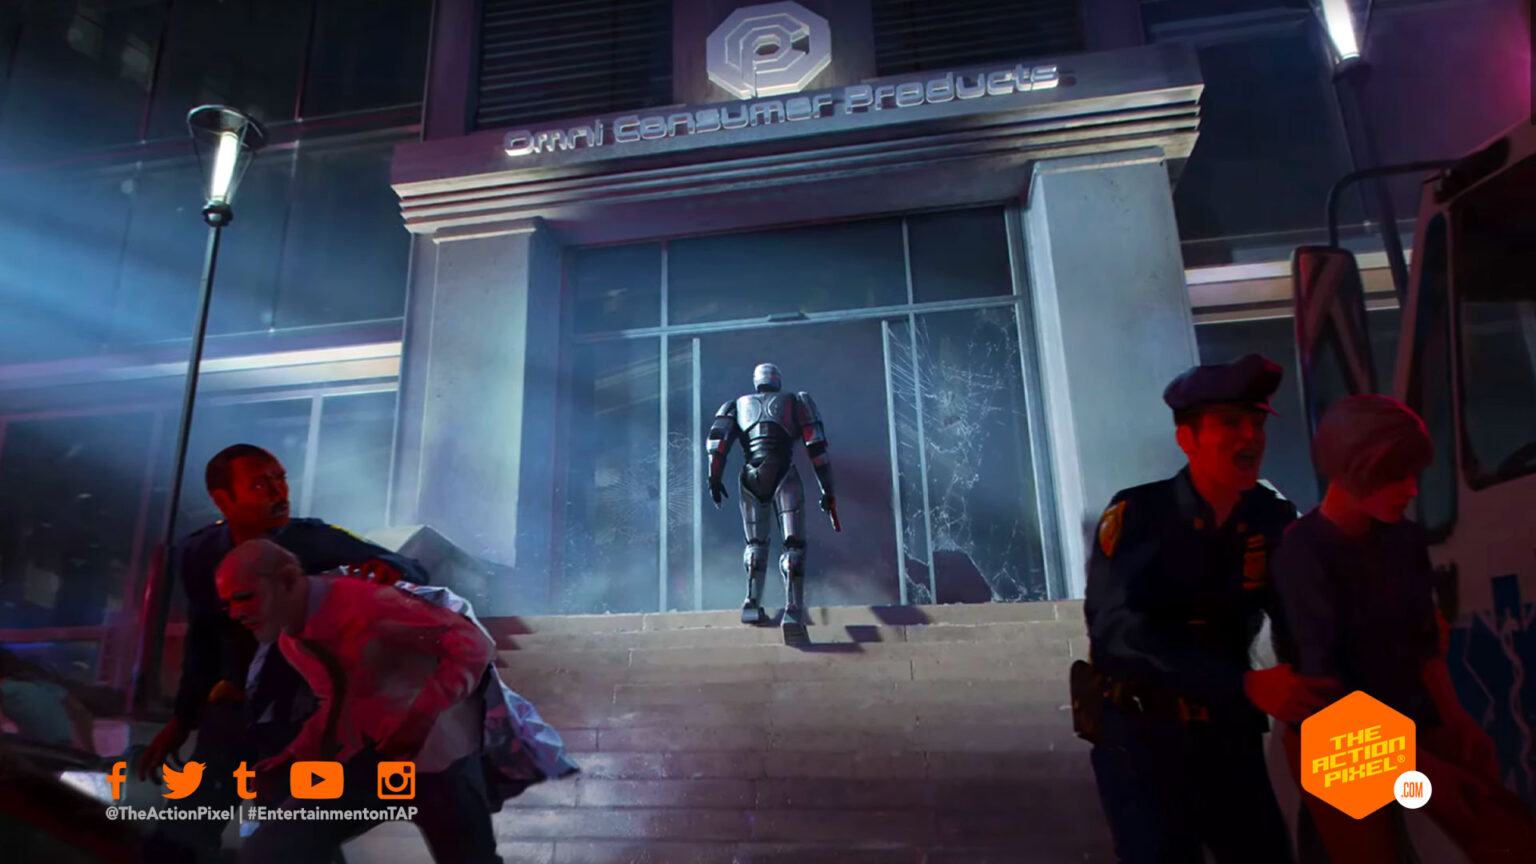 RoboCop: Rogue City download the new for windows